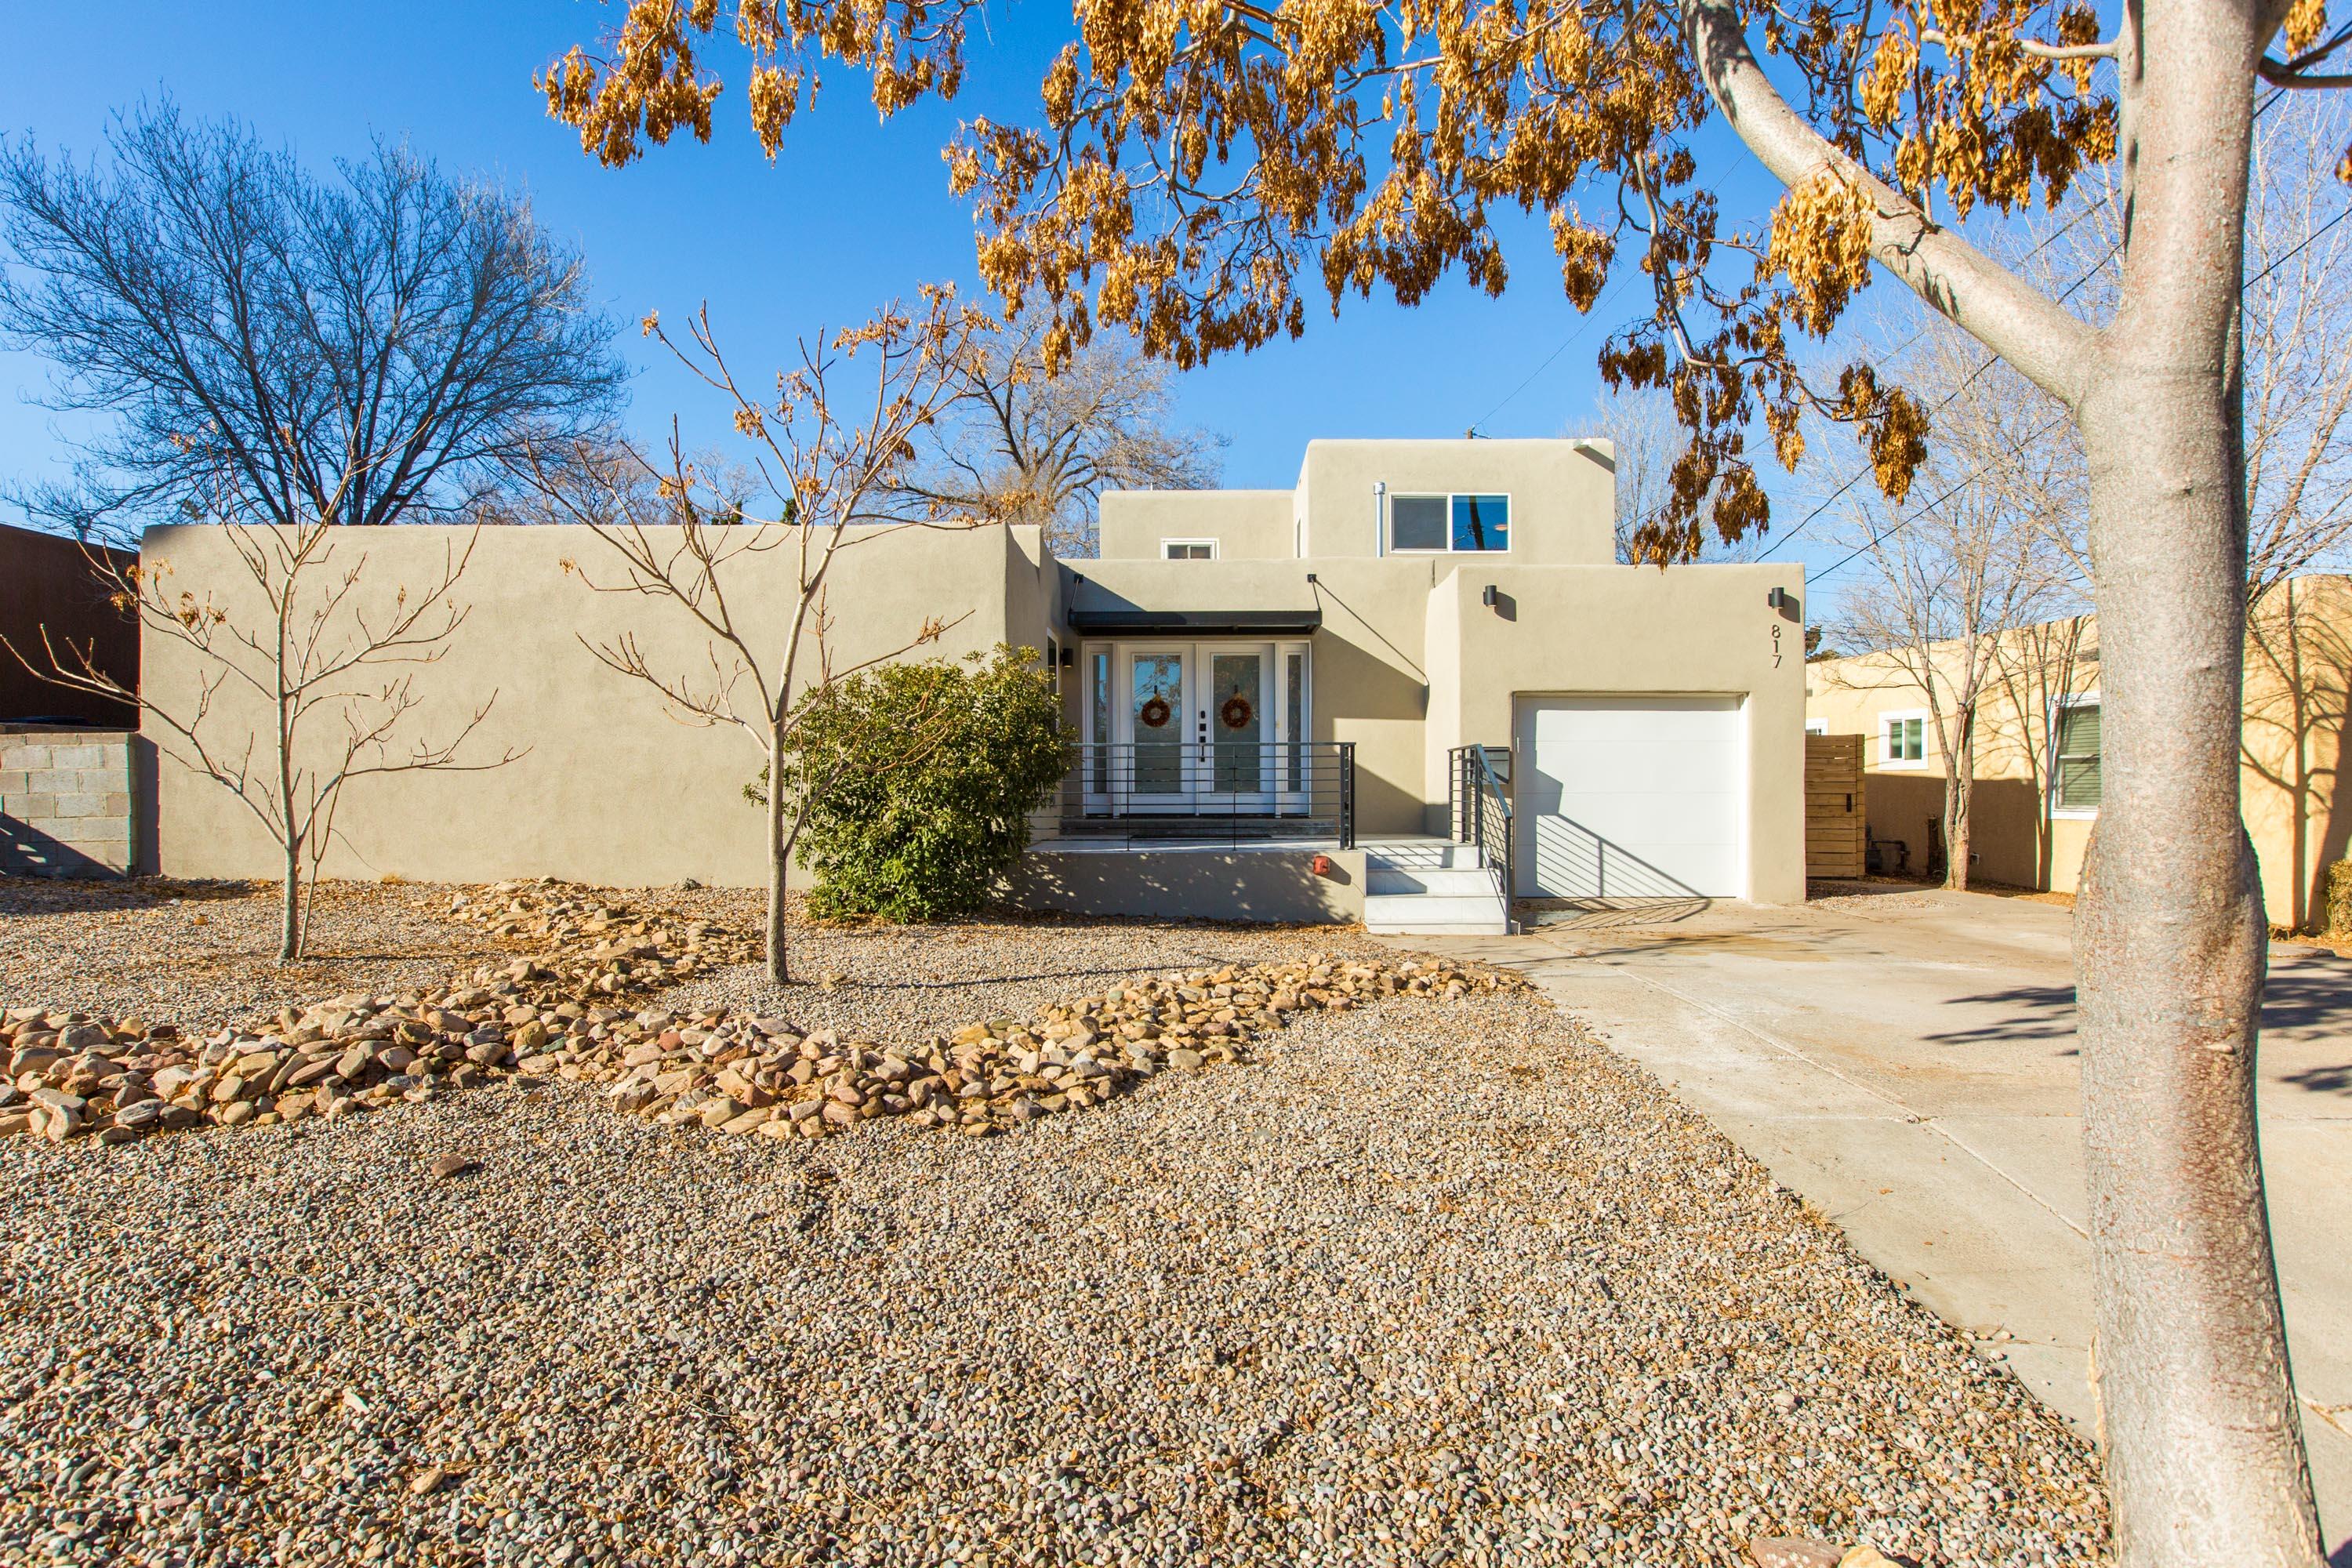 What a rarity 2831sq feet 4 bed 3 bath and a loft/office space in sought after UNM area. Home was completely renovated in 2019 to create a sleek yet thoughtful contemporary space. Gracious Foyer leads into a light filled home.  Beautiful French Oak floors, open inviting kitchen with Quartz countertops, Subway tile backsplash, Ample cabinetry, Pantry, Large kitchen Island, 5 burner stove- woodburning fireplace adds a wonderful feature to this stunning space.  On the main floor you will find an owner suite with a splendid bath and a tremendous walk-in closet also there is a 2nd bedroom on the main floor. Upstairs you will find the 3rd and 4th bedrooms and a light filled loft that works wonderfully as an office space. Home has 2 heating/ 2 refrigerated air units.